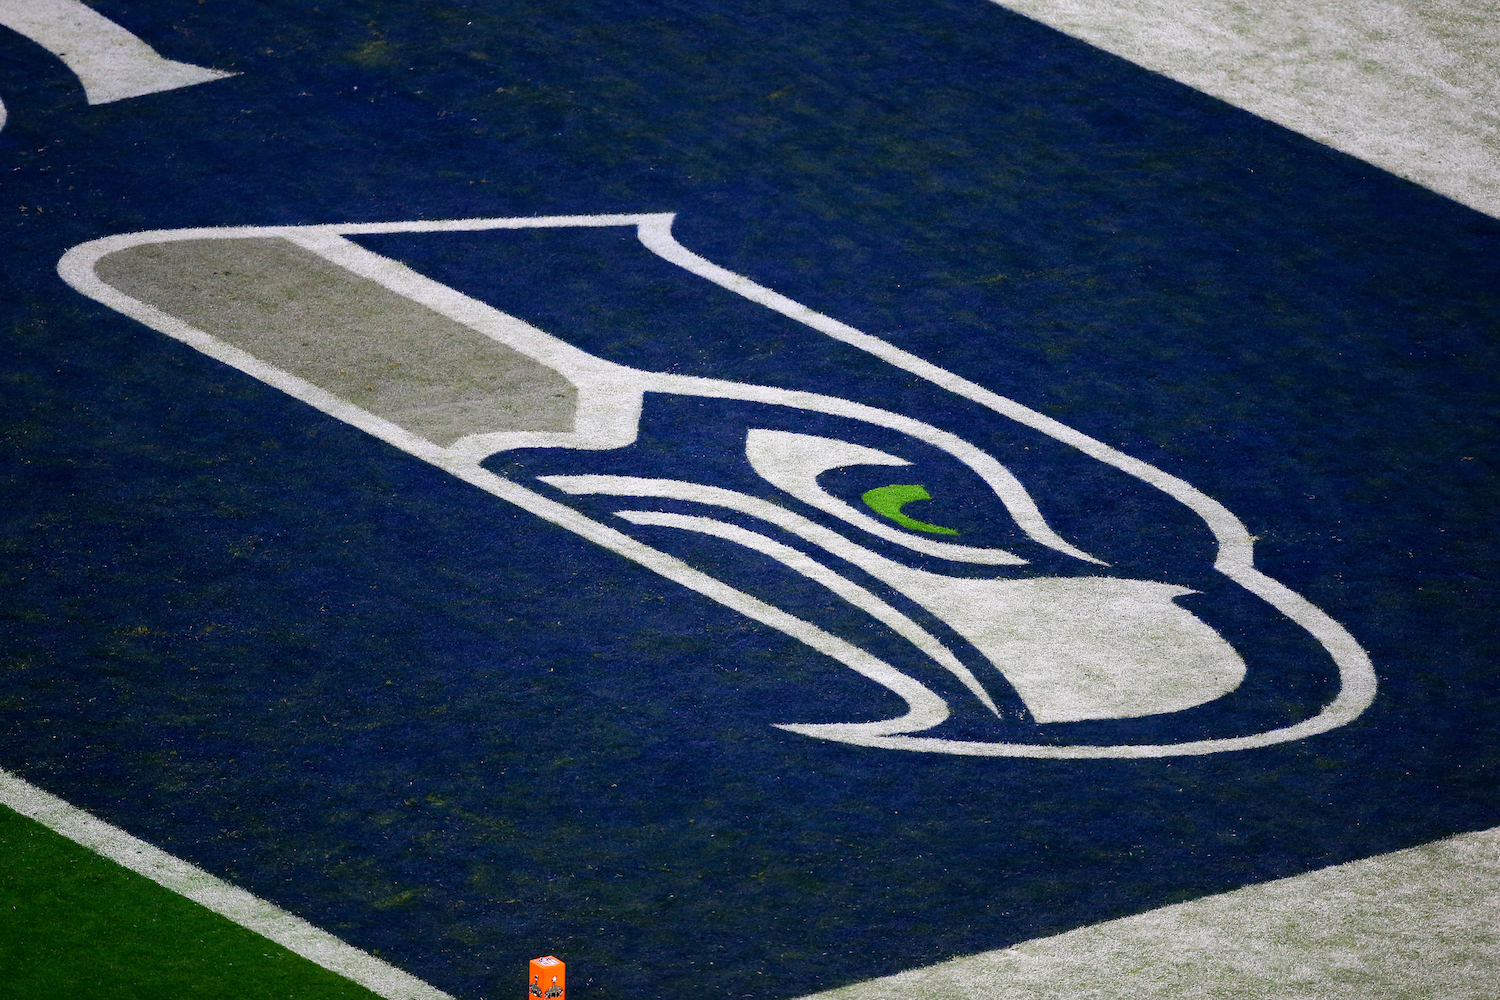 Seattle Seahawks Devastated After Car Accident Left 1 Player Paralyzed